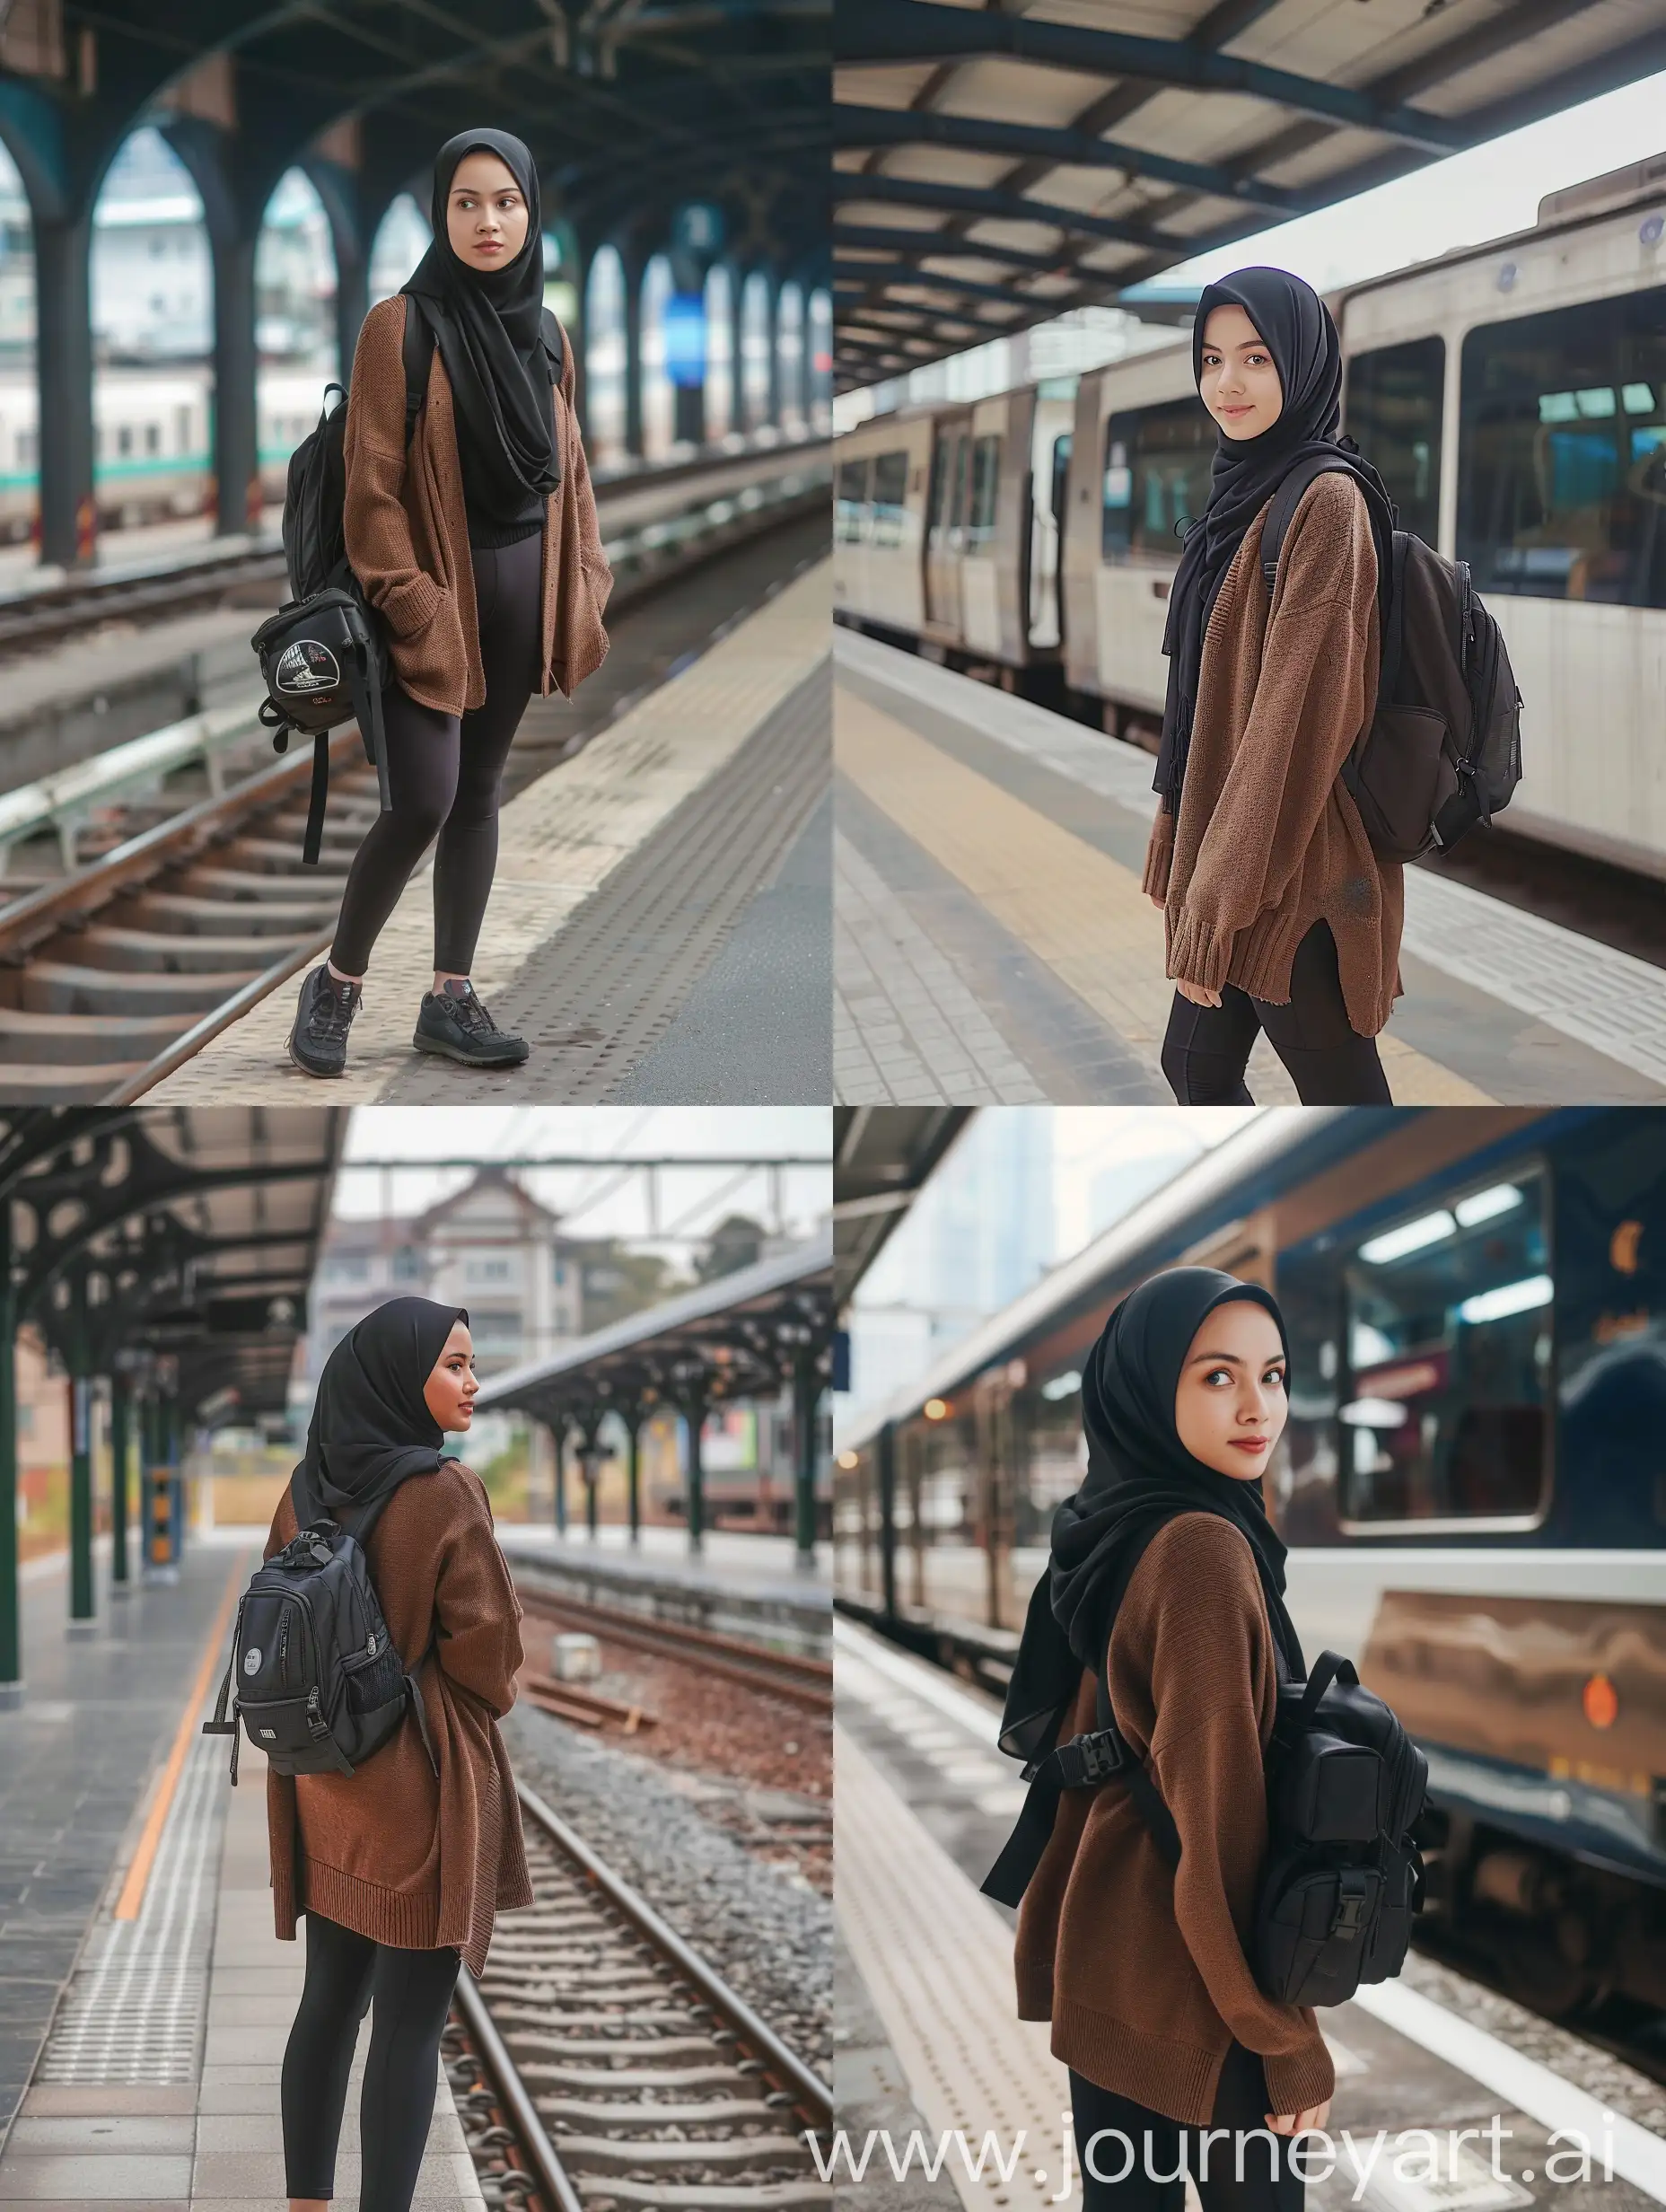 Indonesian-Woman-in-Hijab-at-Train-Station